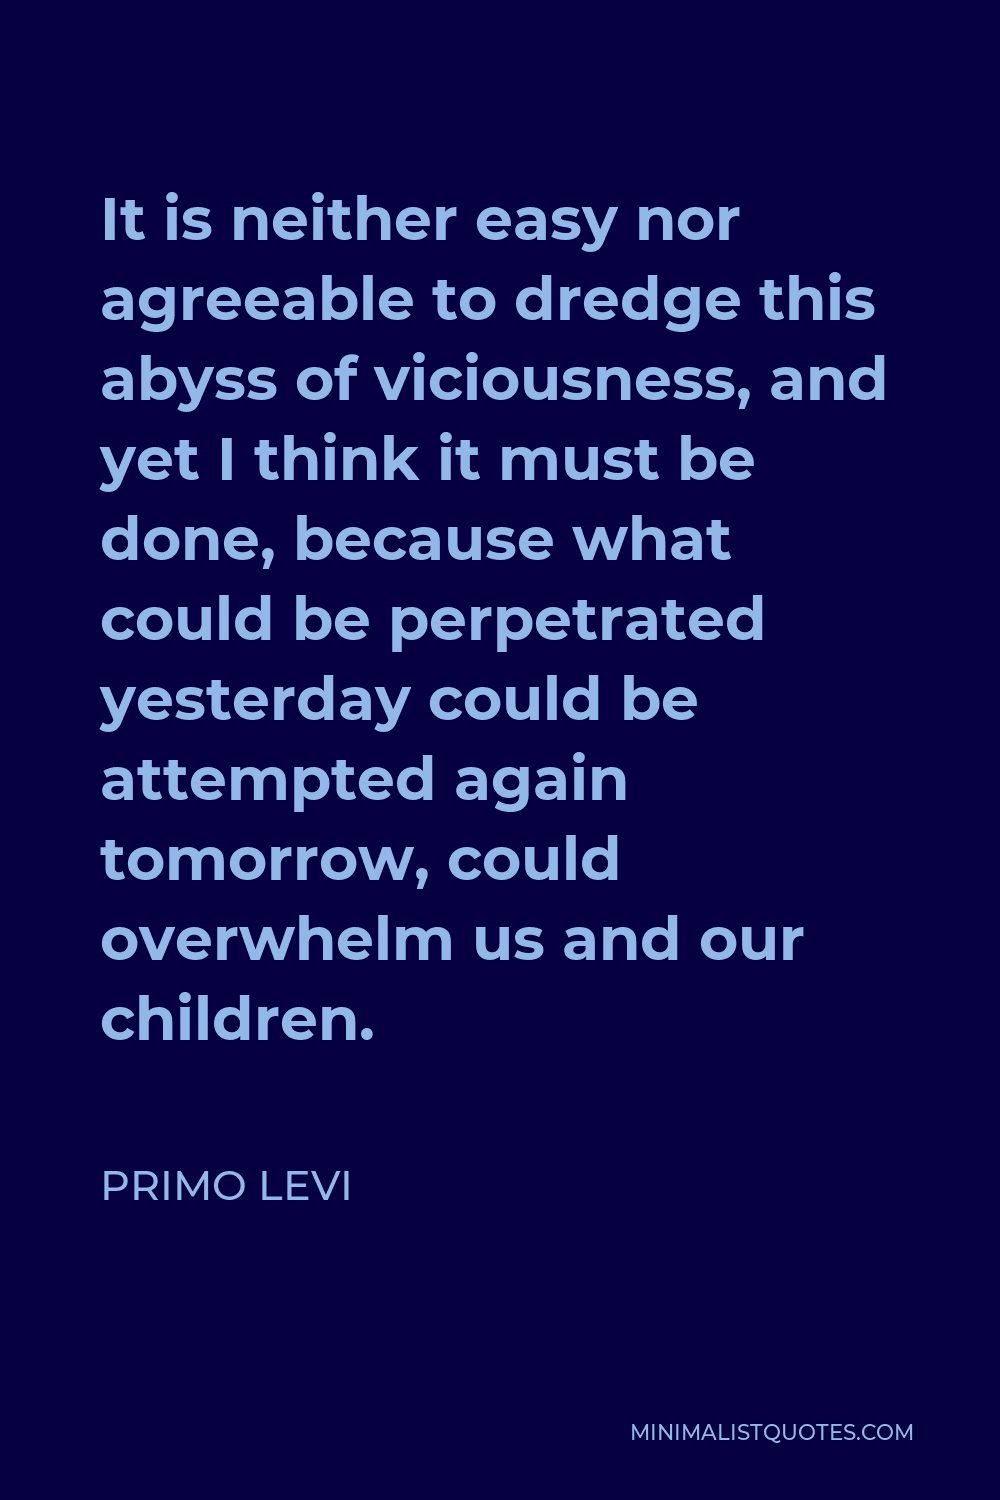 Primo Levi Quote - It is neither easy nor agreeable to dredge this abyss of viciousness, and yet I think it must be done, because what could be perpetrated yesterday could be attempted again tomorrow, could overwhelm us and our children.